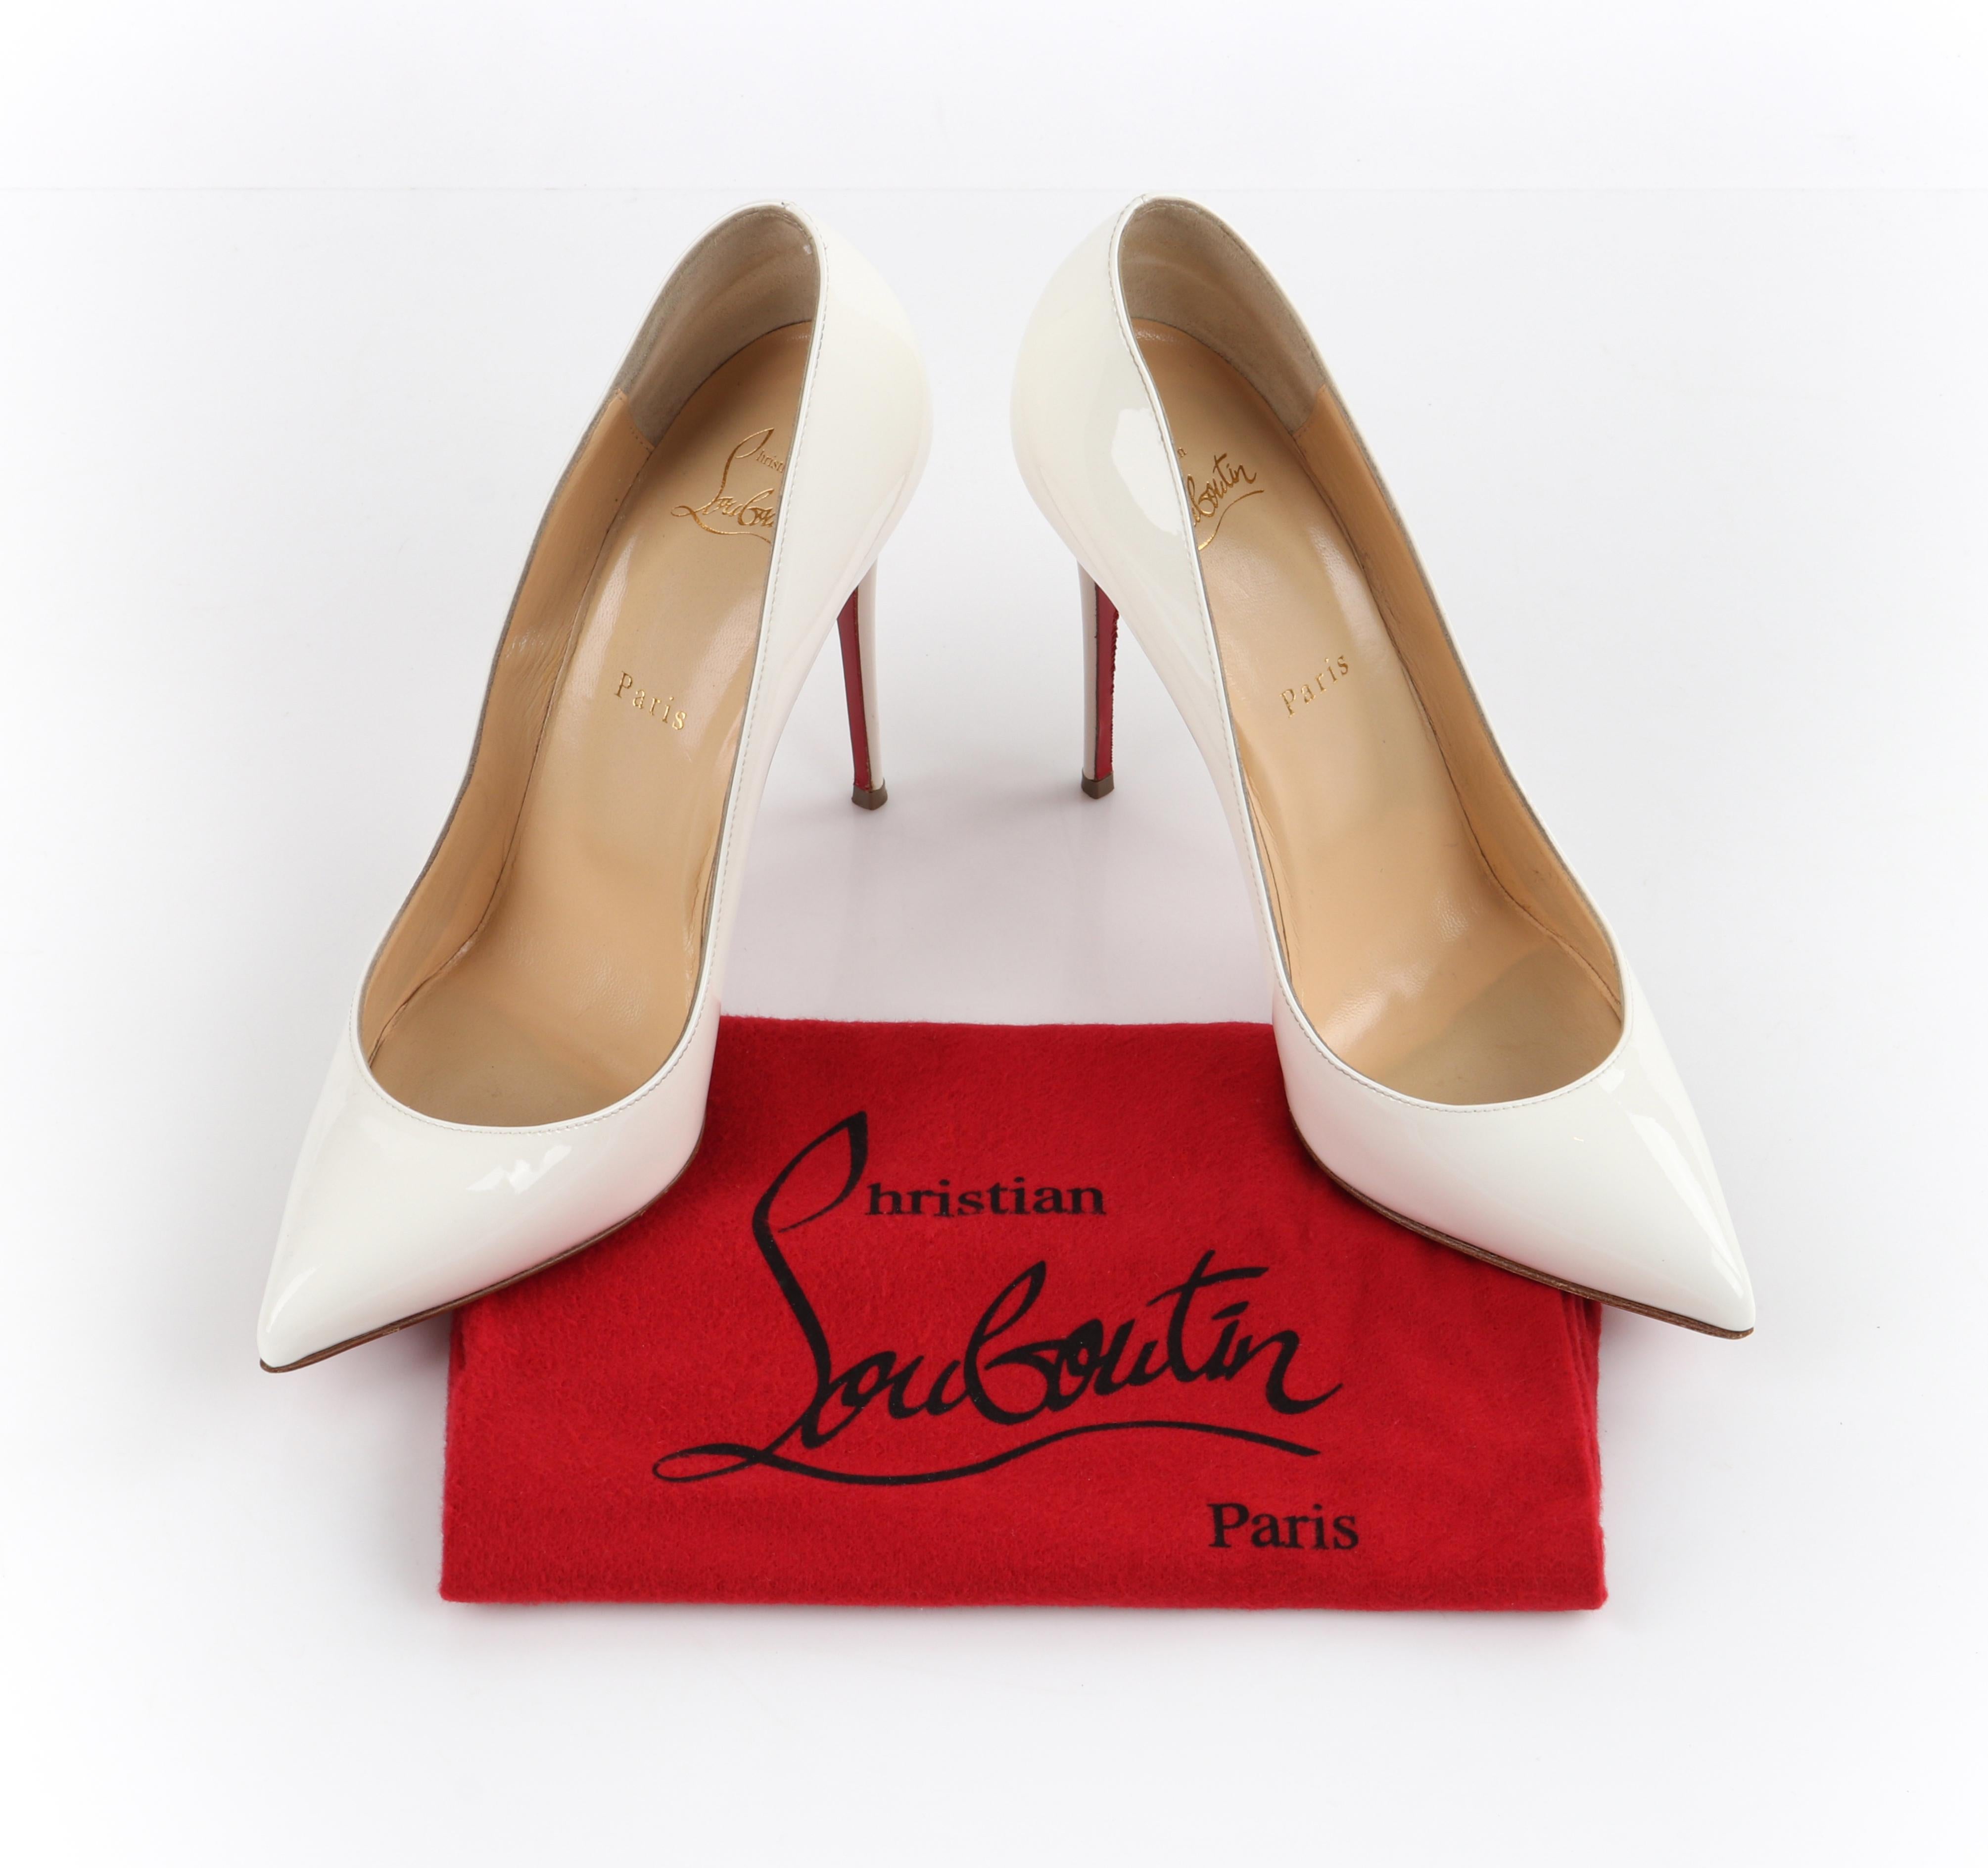 CHRISTIAN LOUBOUTIN “So Kate” 120 White Patent Leather Stiletto High Heel Pumps
 
Brand / Manufacturer: Christian Louboutin
Manufacturer Style Name: “So Kate” Heels
Style: Pumps
Color(s): Exterior: white, red; interior: nude beige
Unmarked Materials